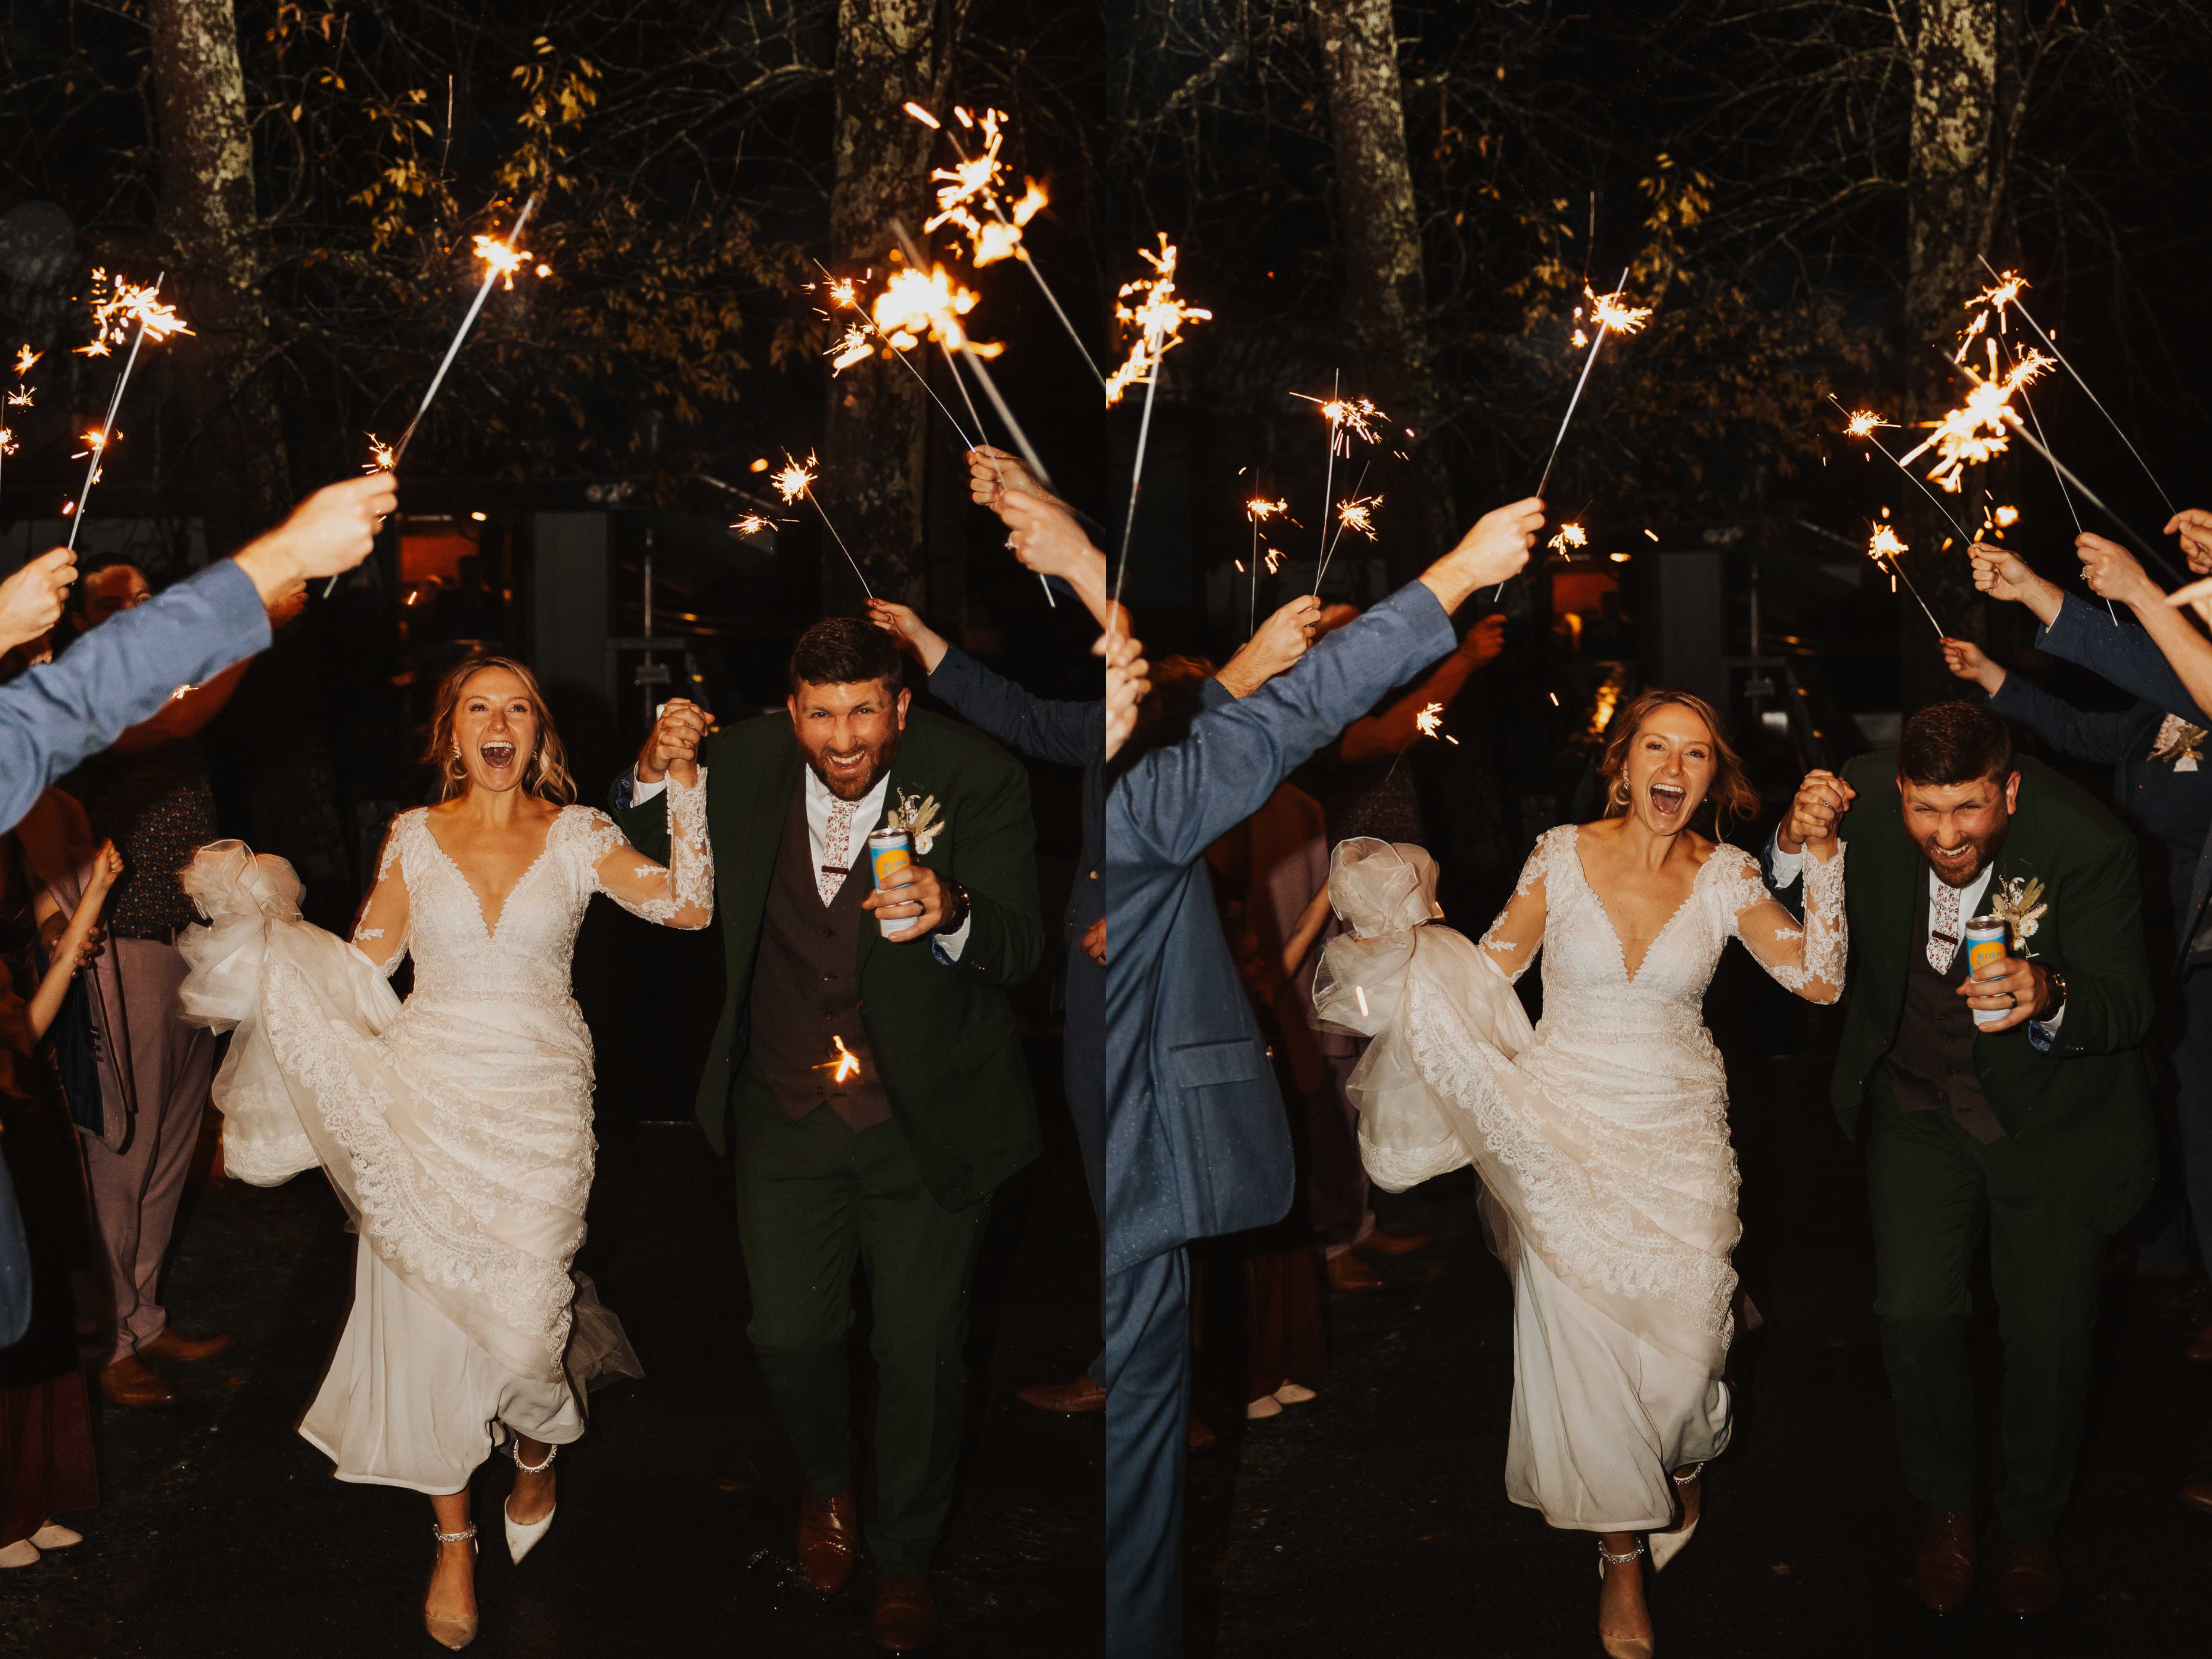 2 photos side by side of a bride and groom running and smiling as they exit their wedding reception through a tunnel of sparklers held by their guests